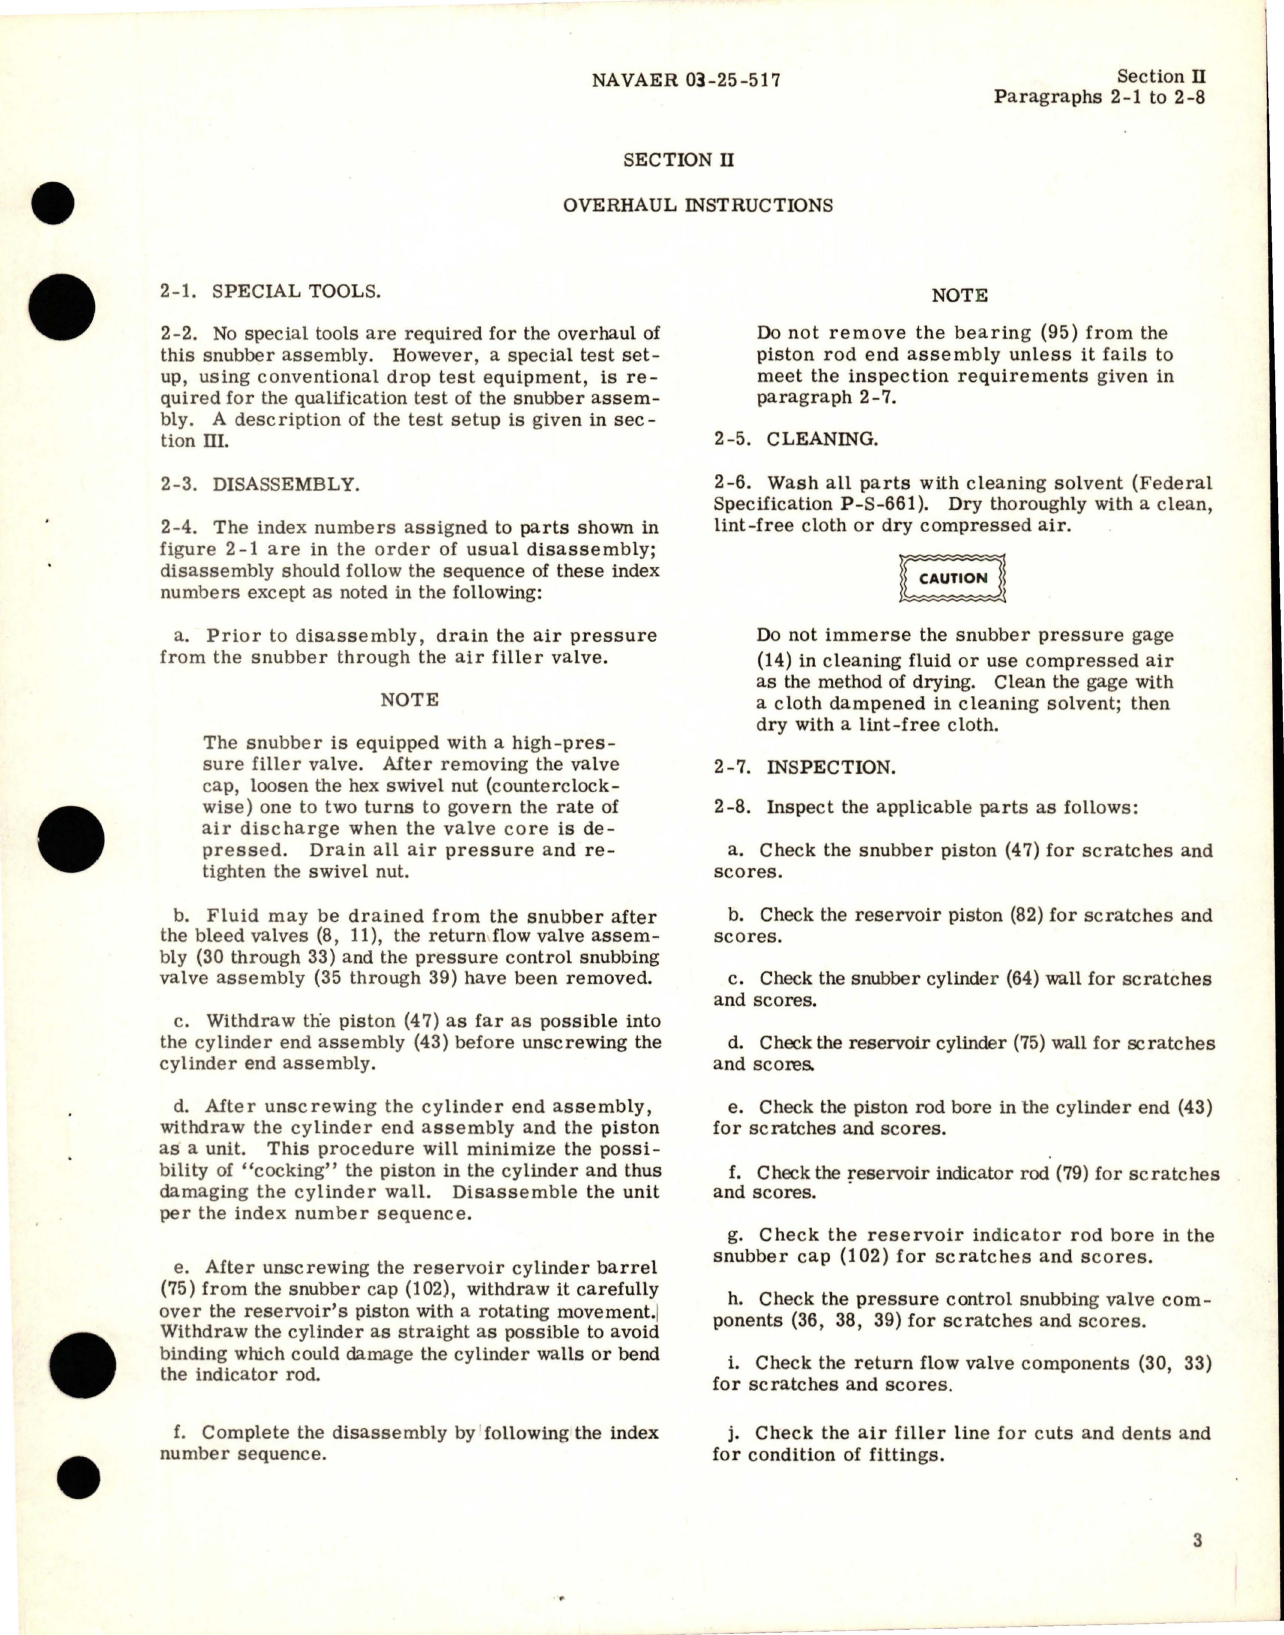 Sample page 5 from AirCorps Library document: Overhaul Instructions for Arresting Gear Snubber Assembly - Part 181-56201 and 181-56201-10 